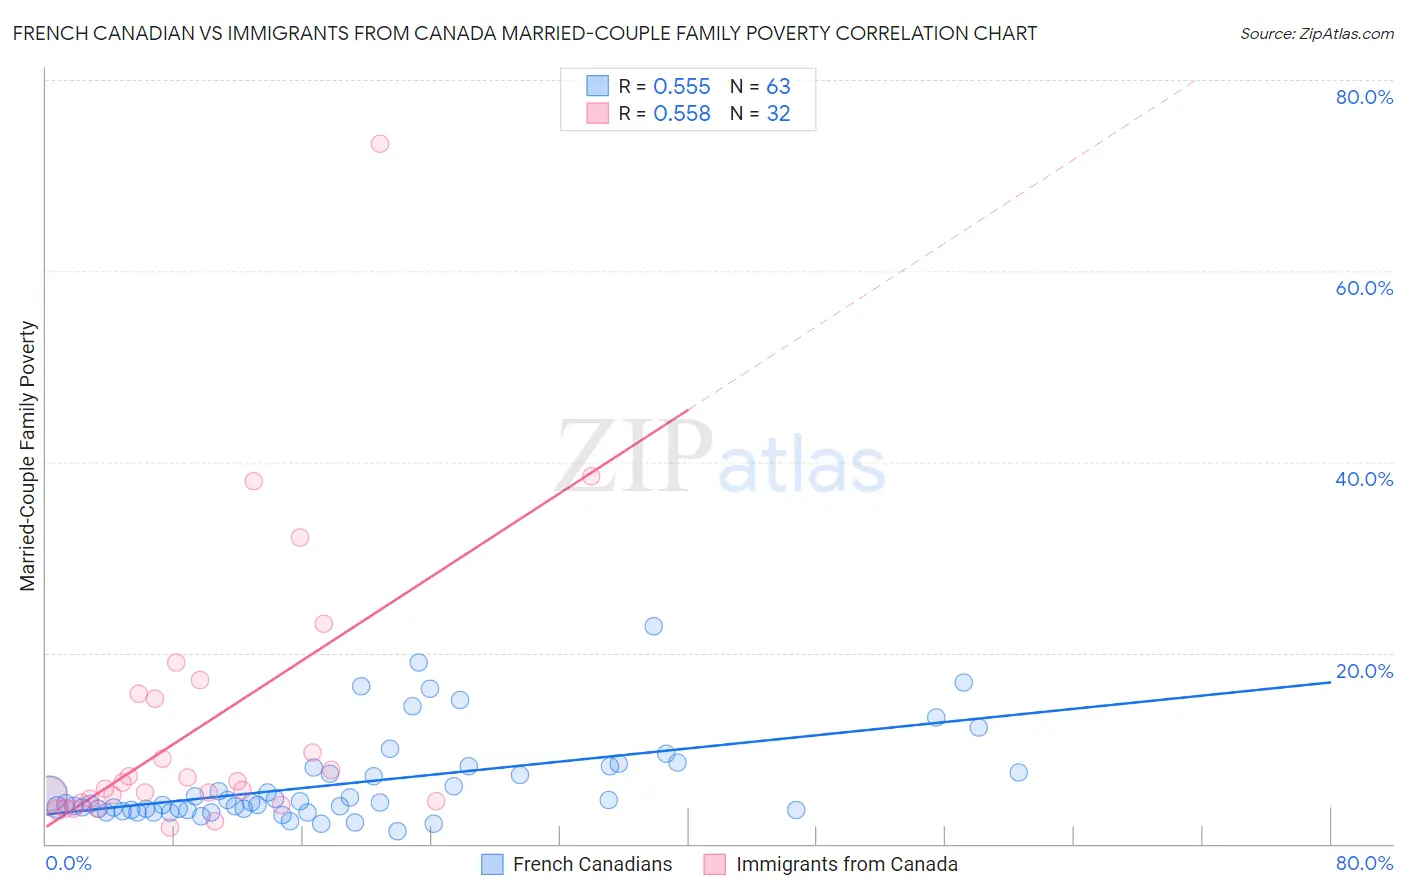 French Canadian vs Immigrants from Canada Married-Couple Family Poverty